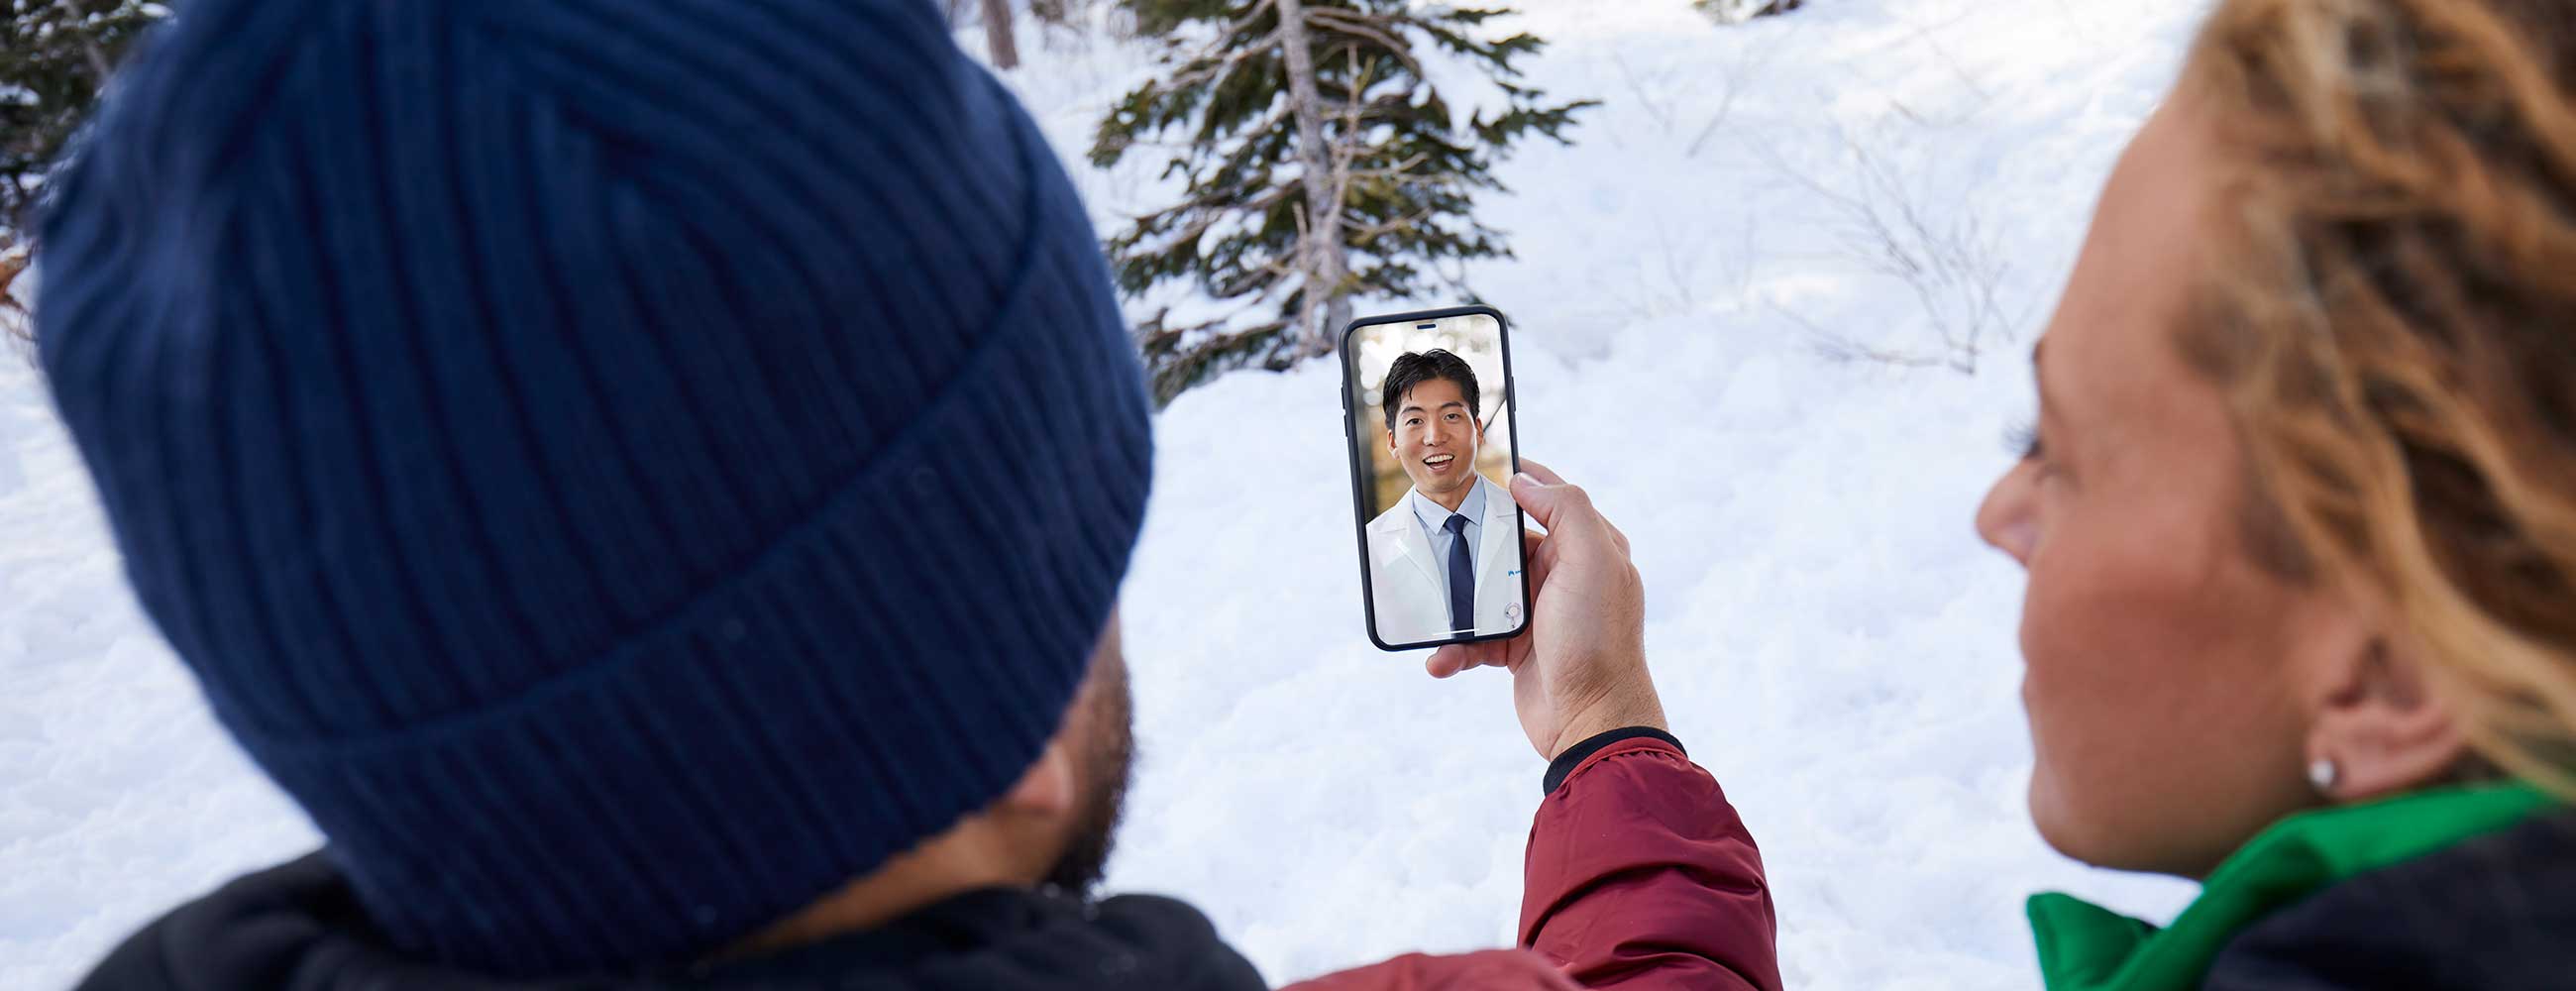 A man and woman in a telehealth visit with a physician while outdoors, in the snow.